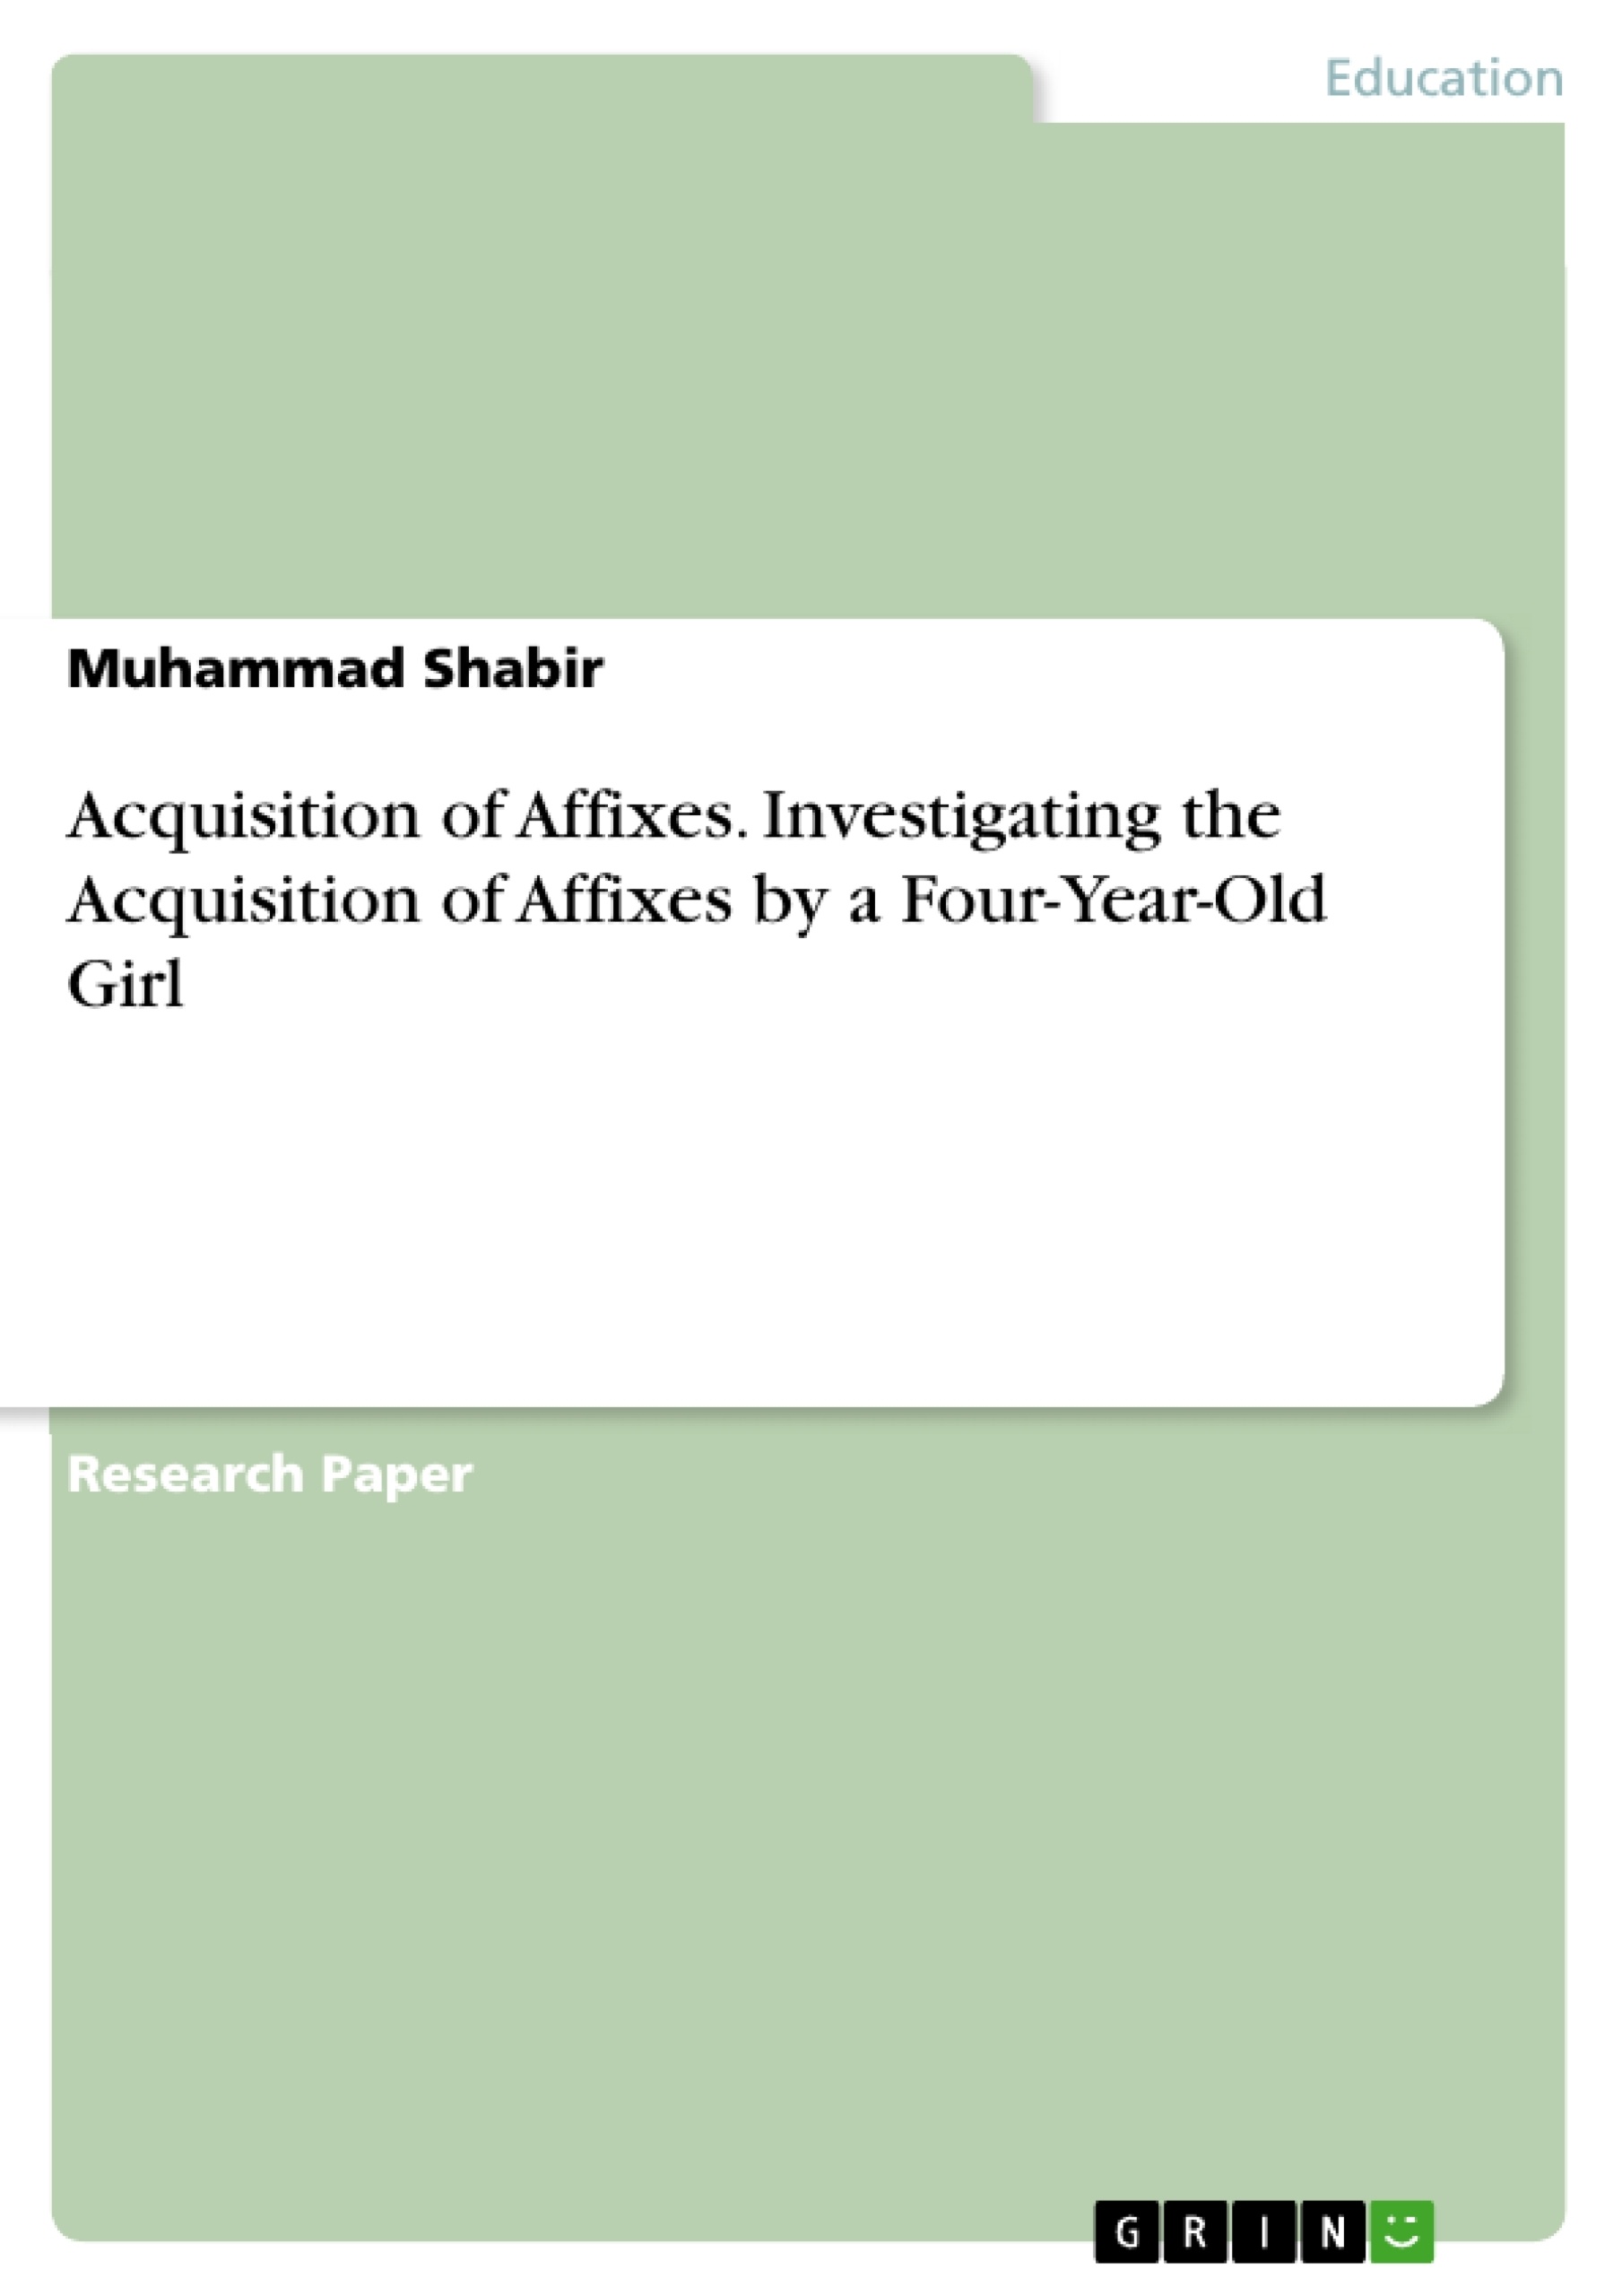 Title: Acquisition of Affixes. Investigating the Acquisition of Affixes by a Four-Year-Old Girl